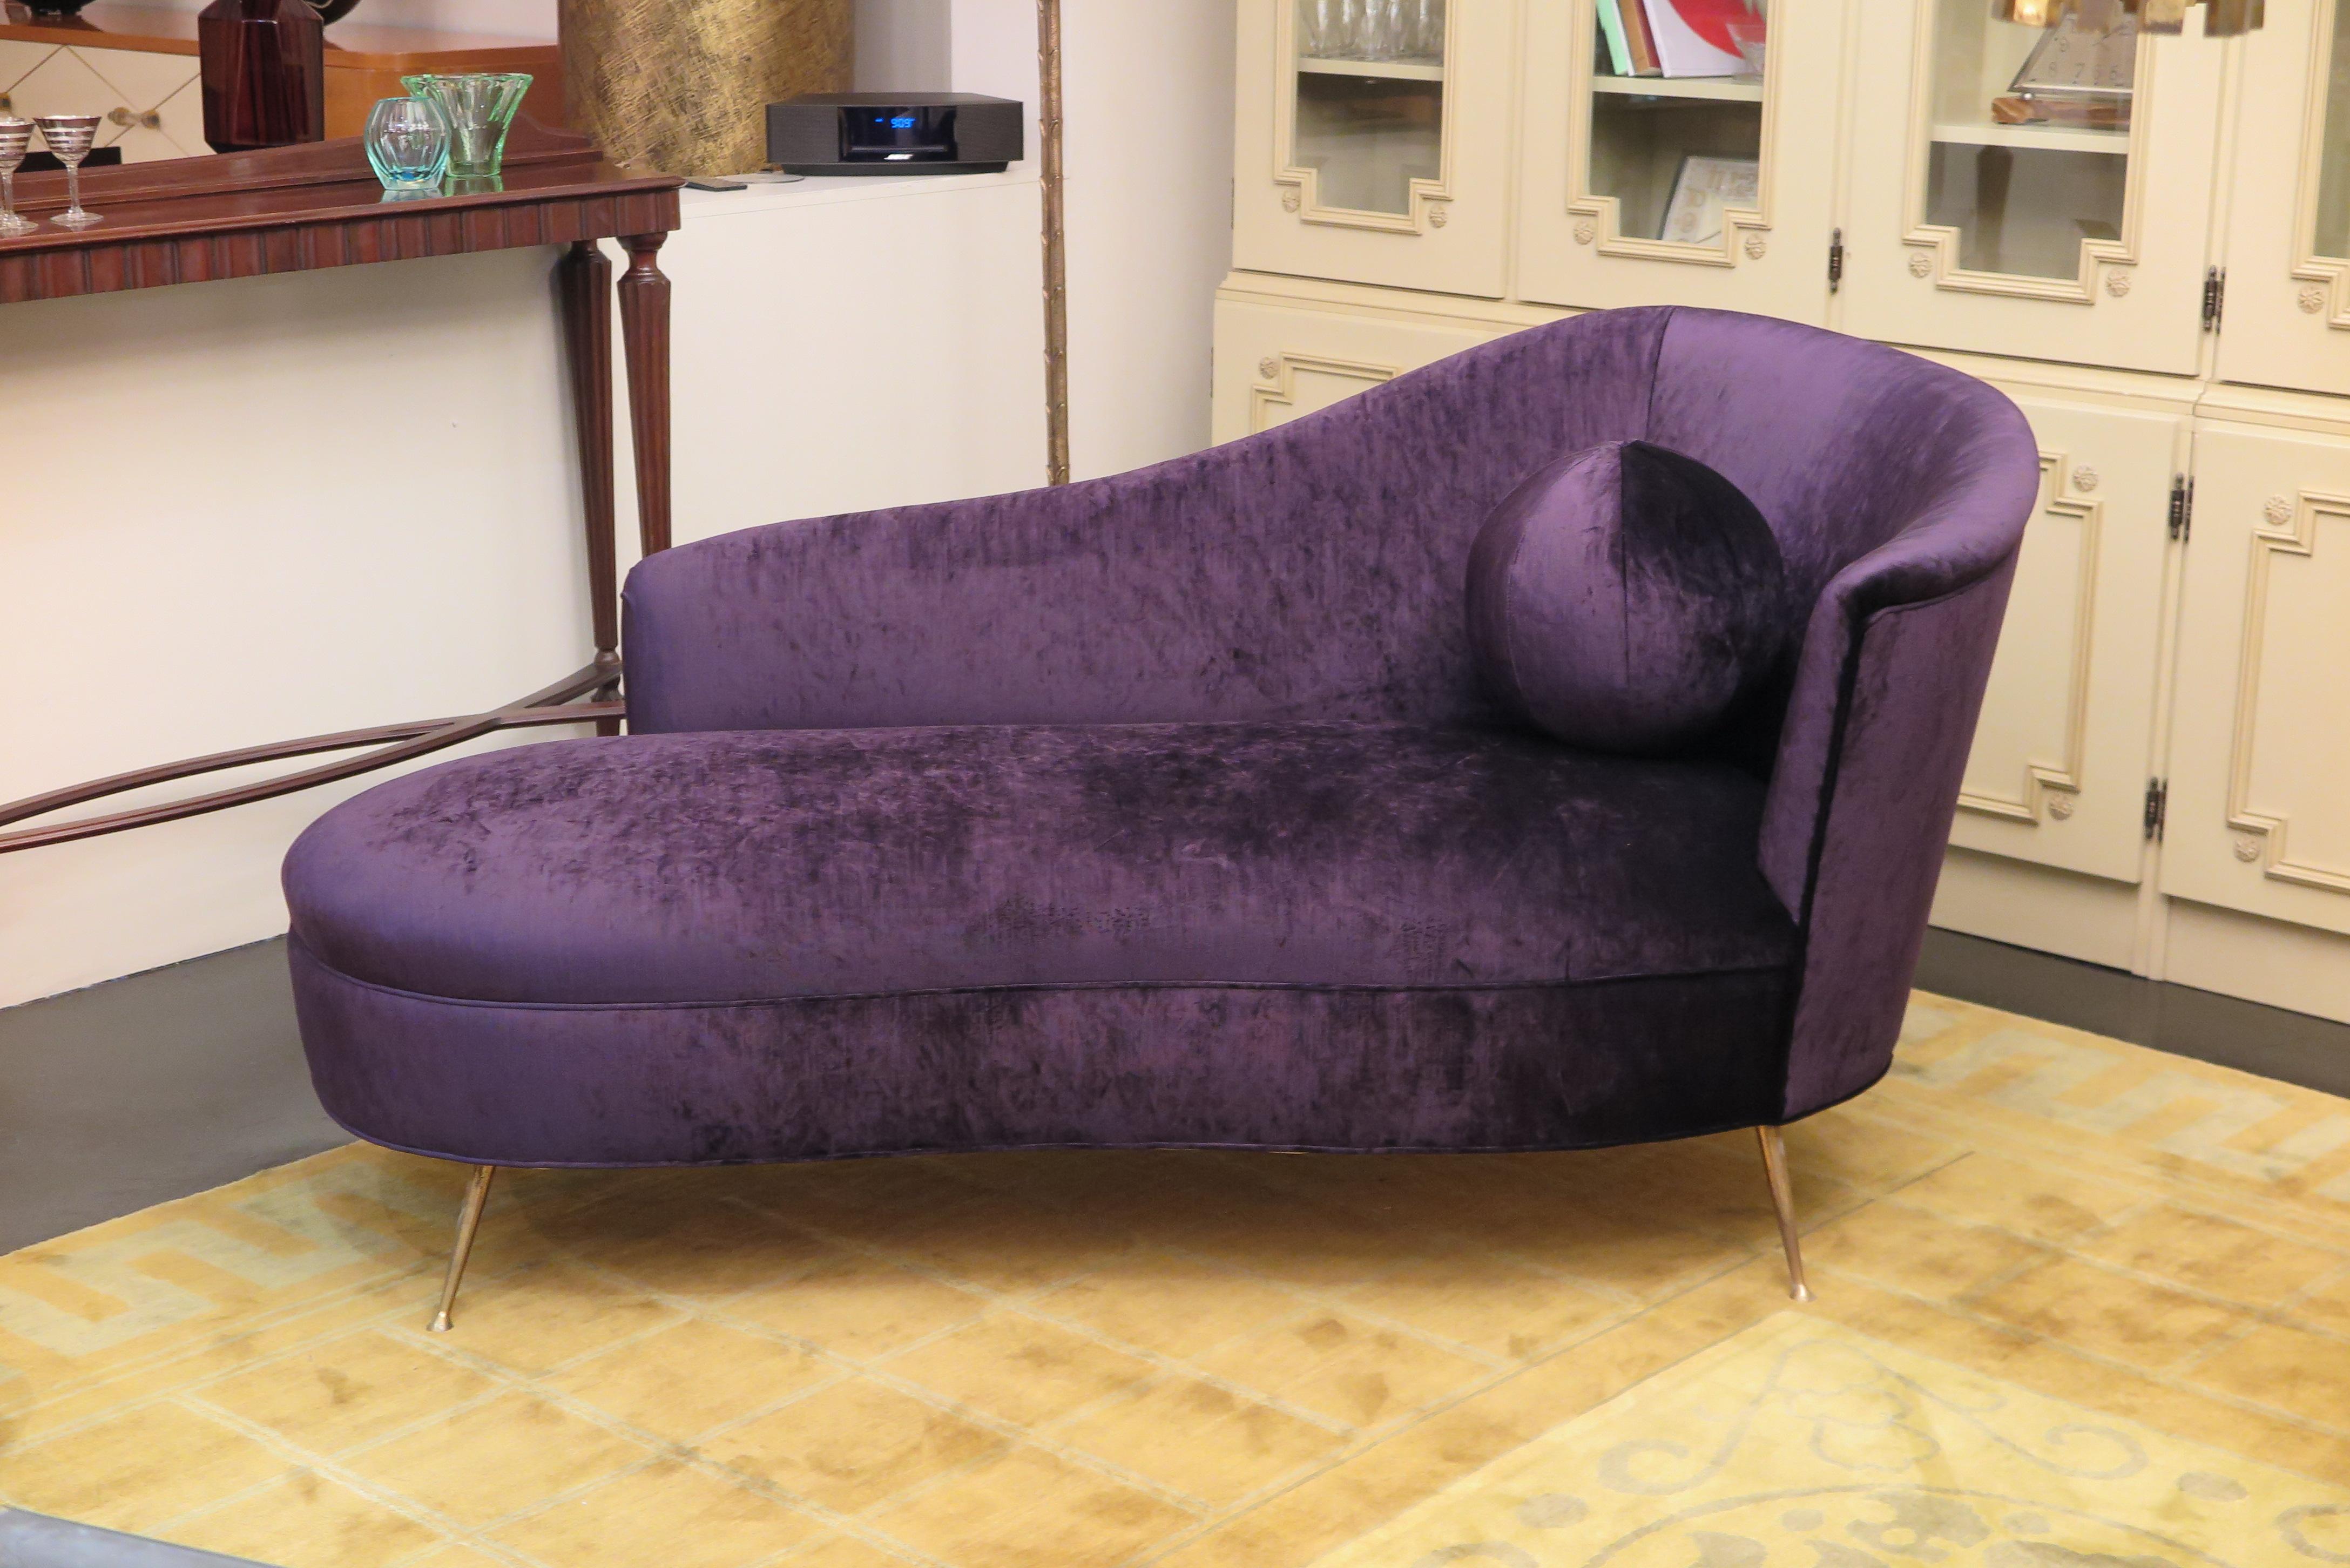 Italian mid-century daybed with feminine curves in purple velvet. This newly upholstered daybed features an upholstered curved frame, perfect for a luxury closet or bedroom. Four brass legs are tapered. Rounded accent pillow is a whimsical new